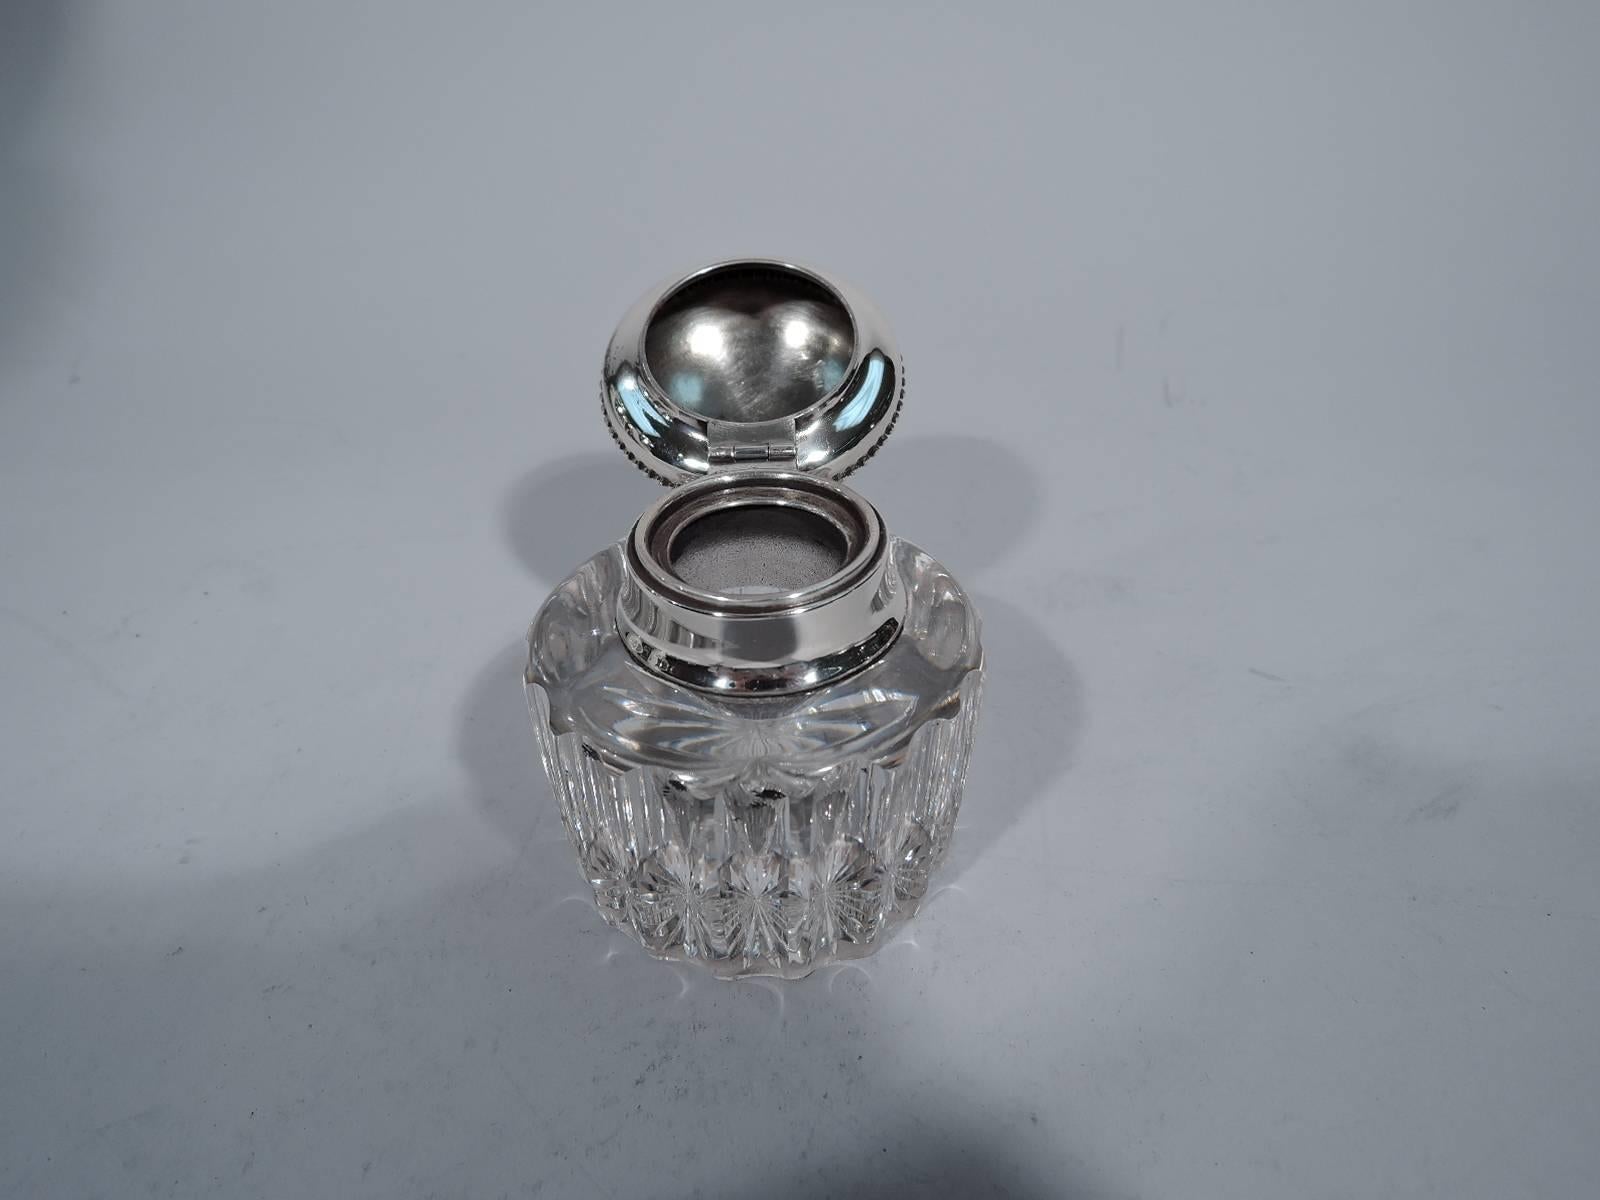 Classical sterling silver inkwell. Made by Gorham in Providence in 1894. Clear glass with fluted sides and ovoid well. Short neck with silver collar and hinged and beaded bun cover. A neat desk accessory. Hallmark includes date symbol and no. S8130.